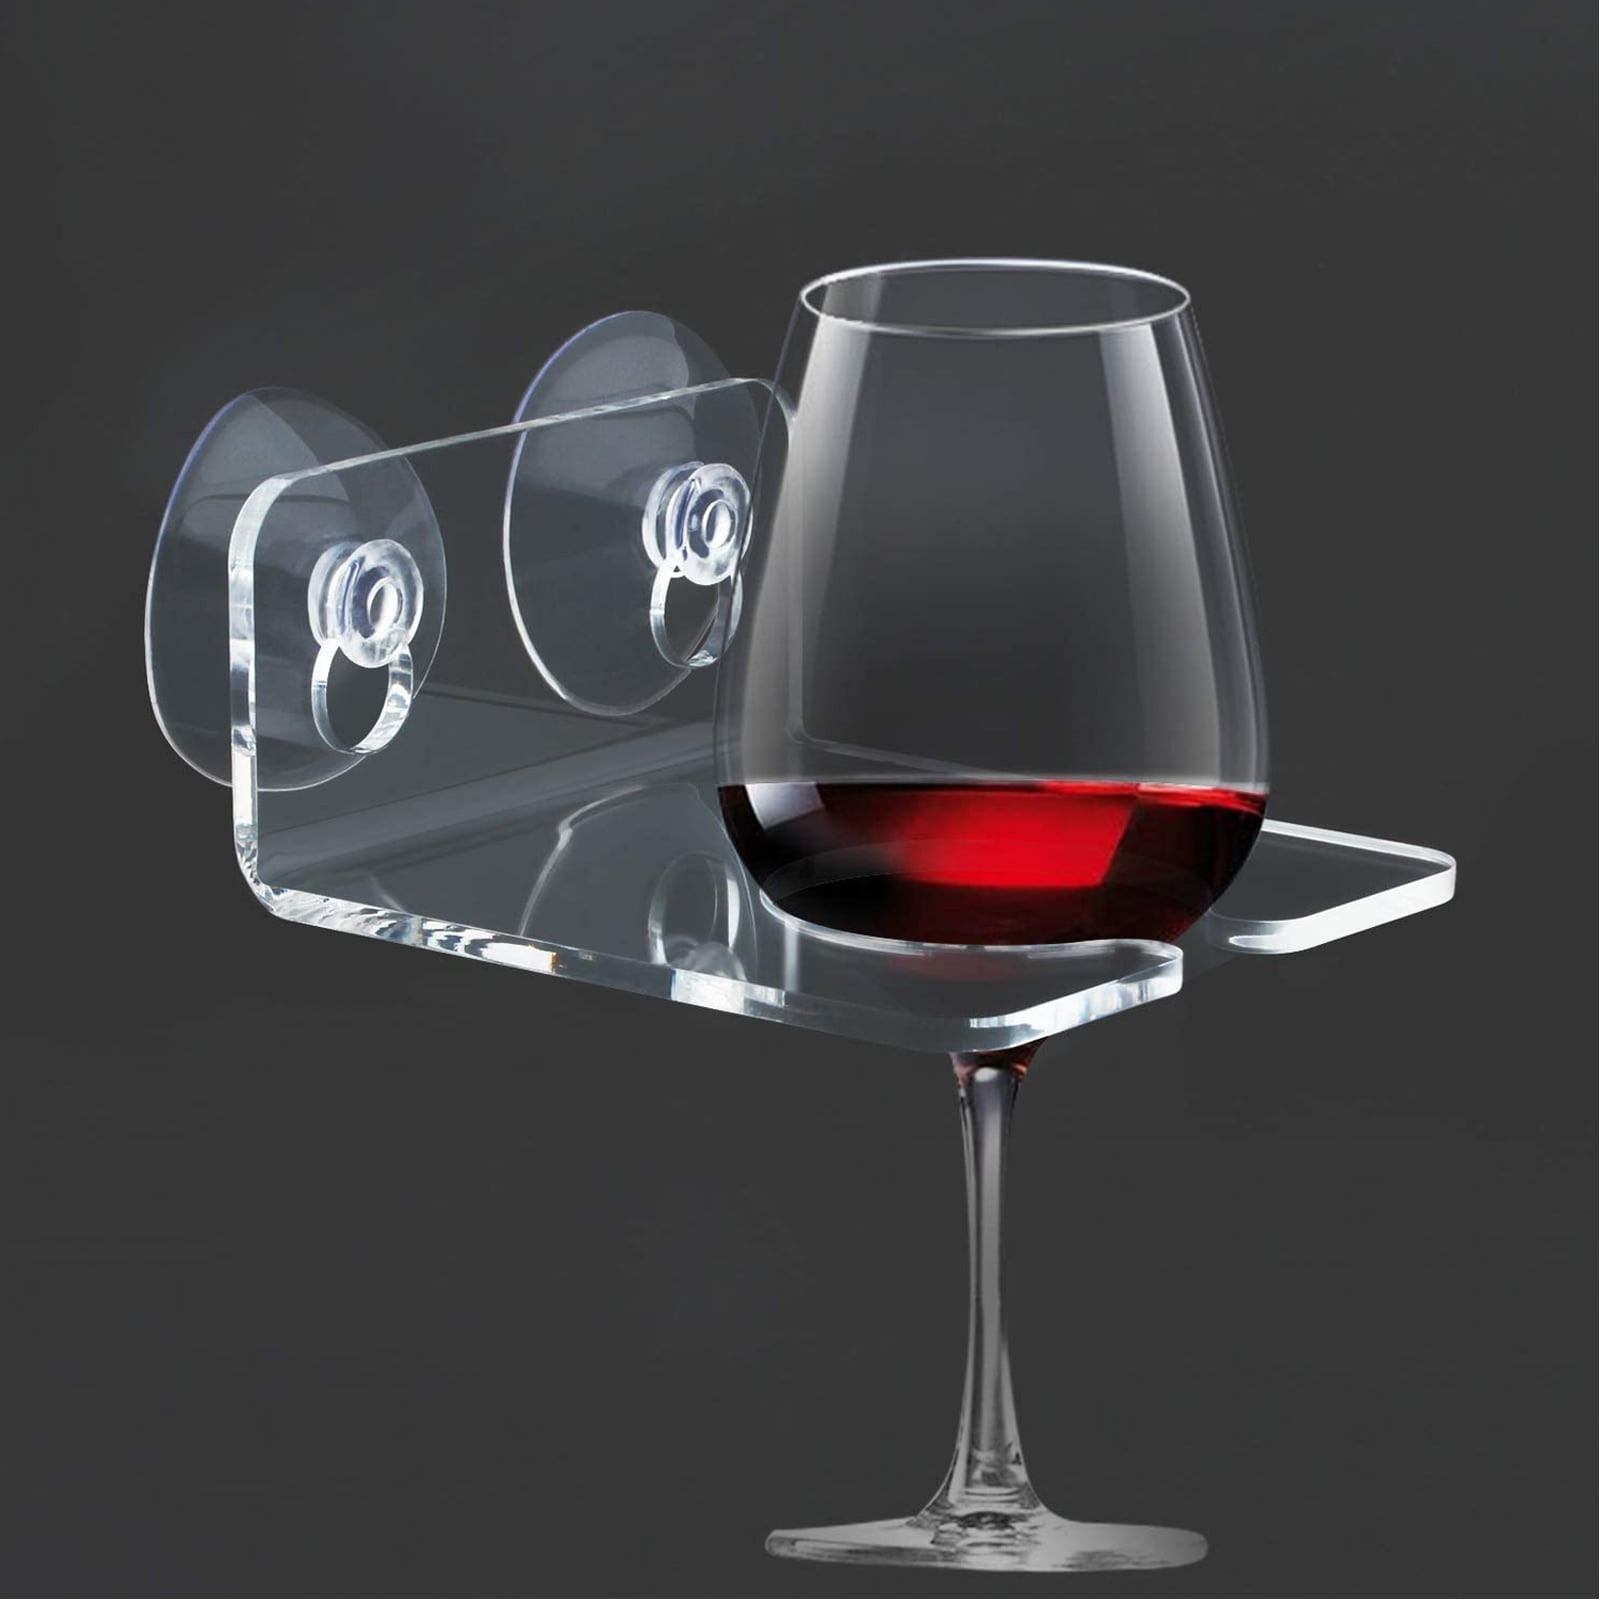 Suction Cup Drink Holder Kita